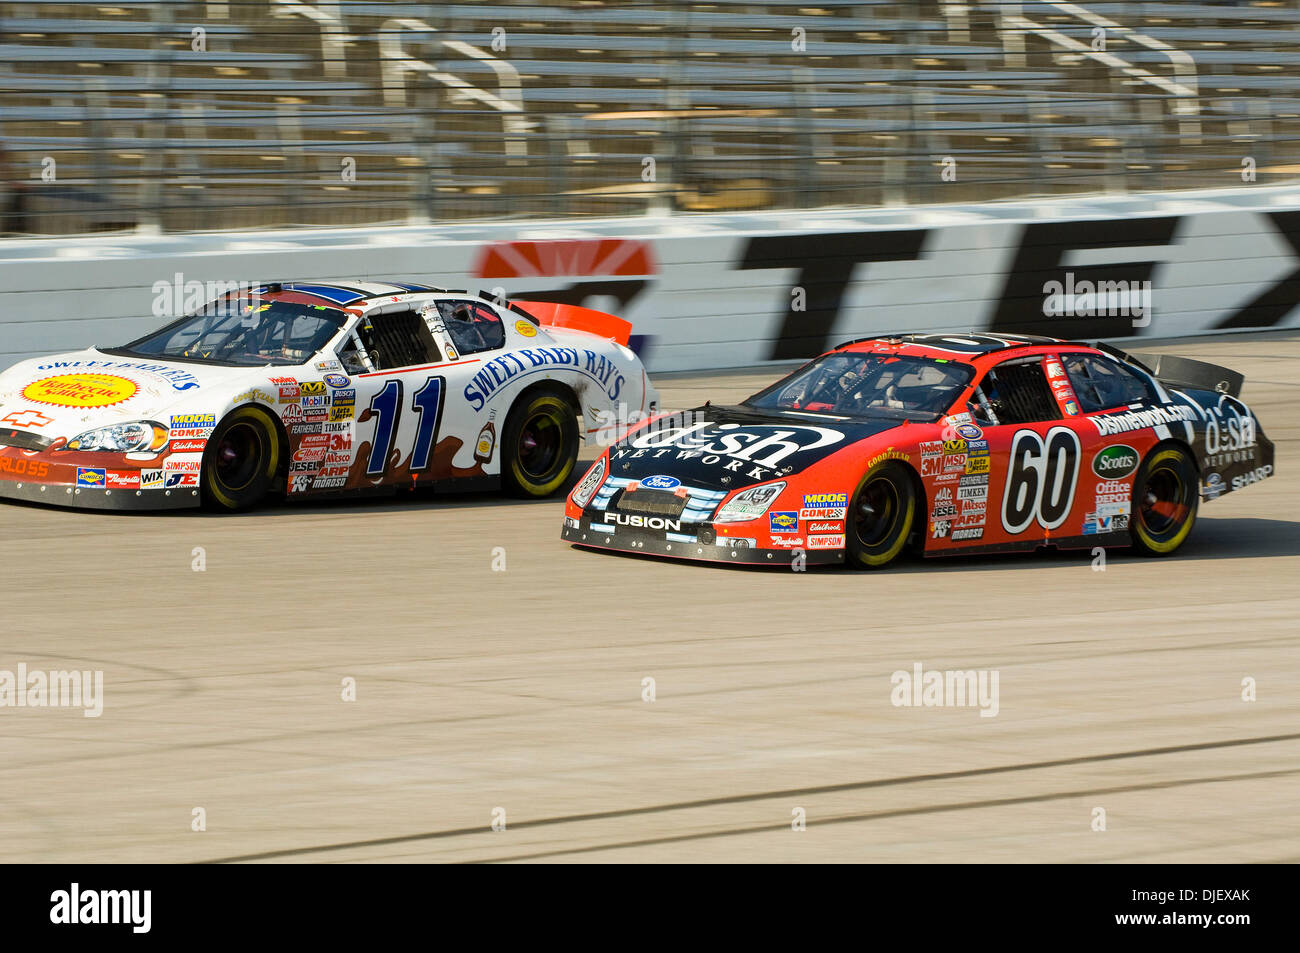 Nov 03, 2007 - Fort Worth, Texas, USA - The #60 car of CARL EDWARDS and the #11 car of JASON KELLER during the NASCAR Busch Series race at the Texas Motor Speedway. (Credit Image: © David Bailey/ZUMA Press) Stock Photo